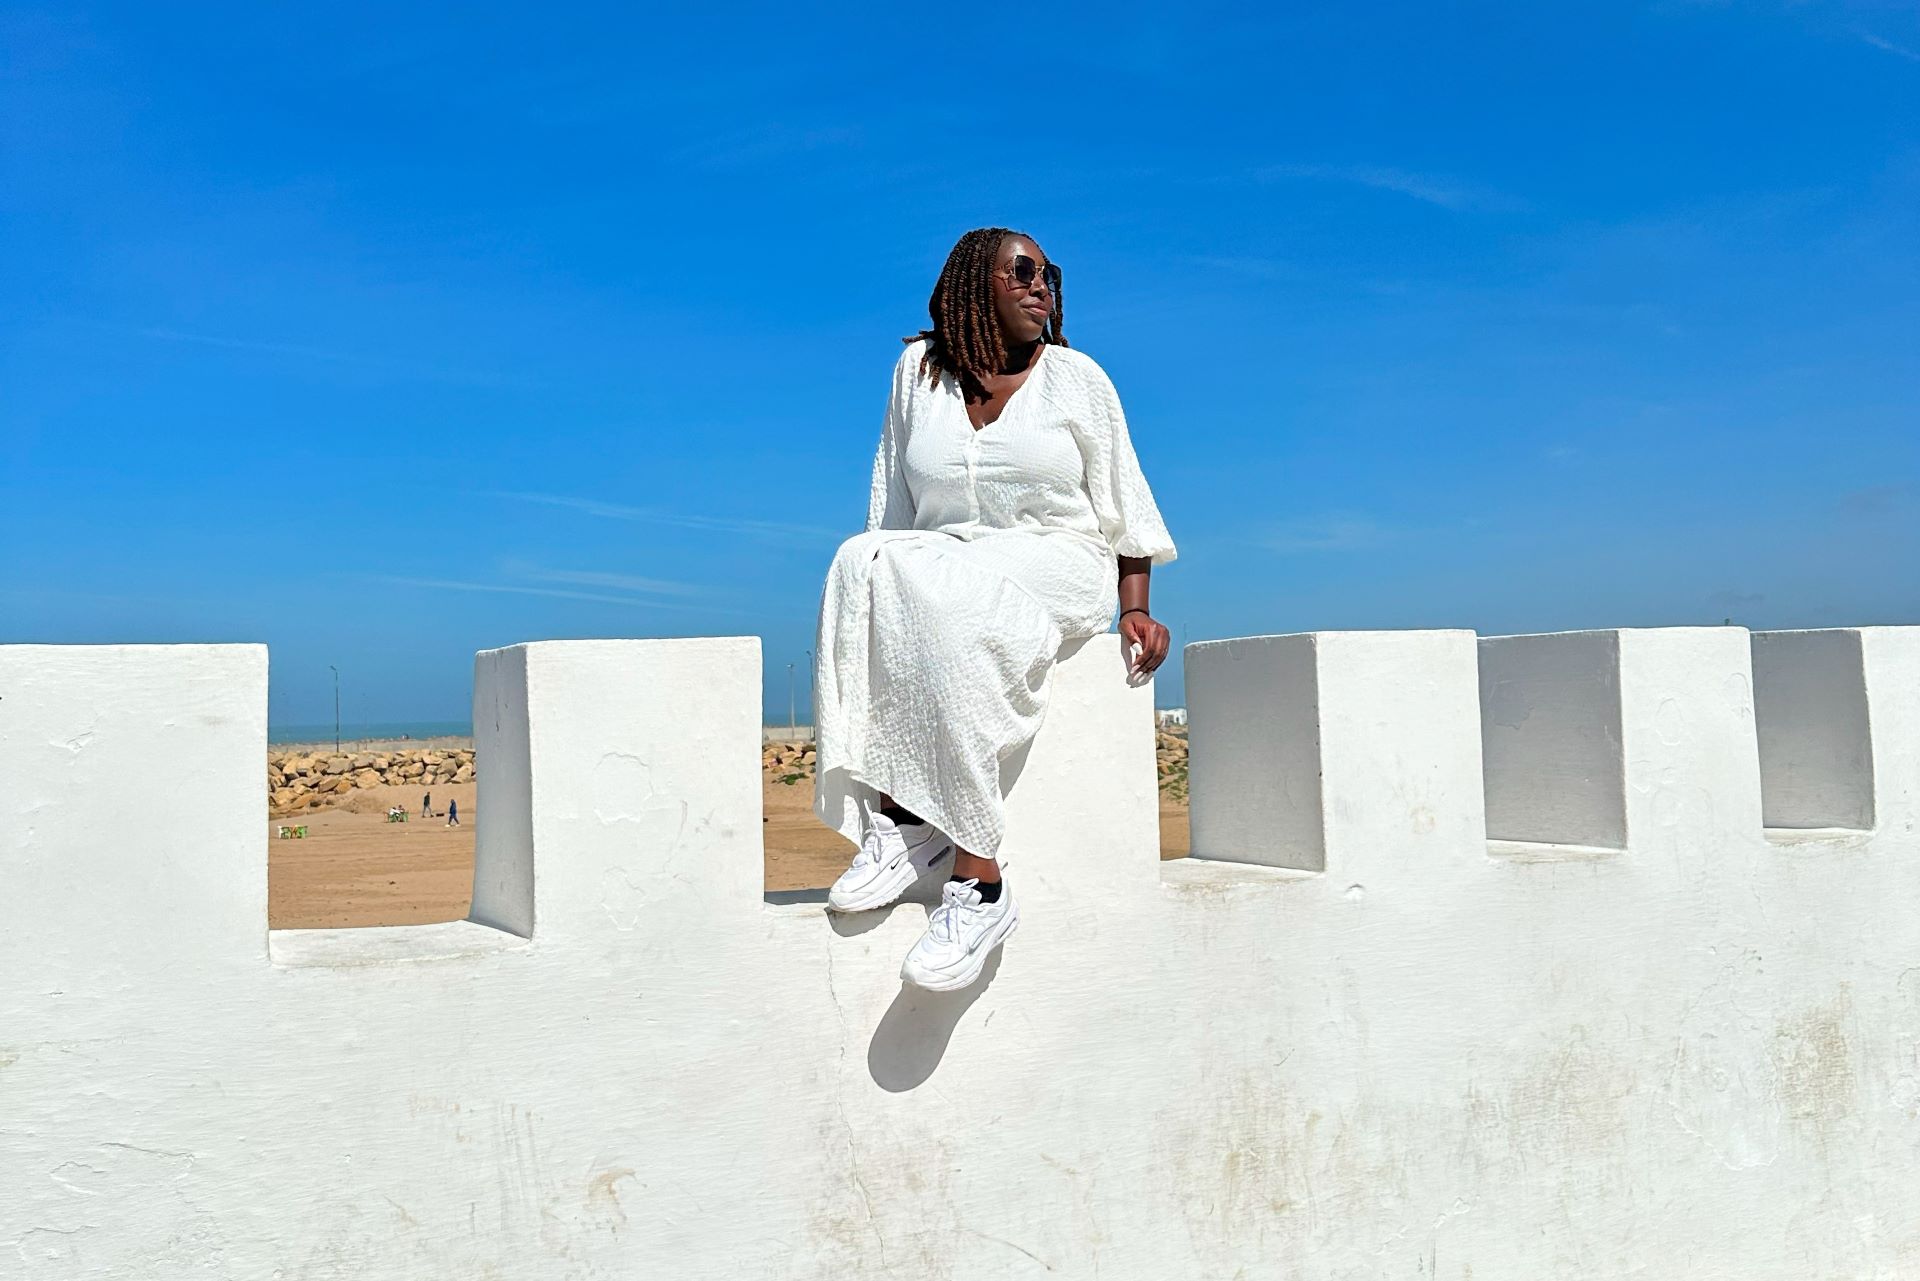 a Black woman sits perched on top of a white structure in Morocco with the desert behind her